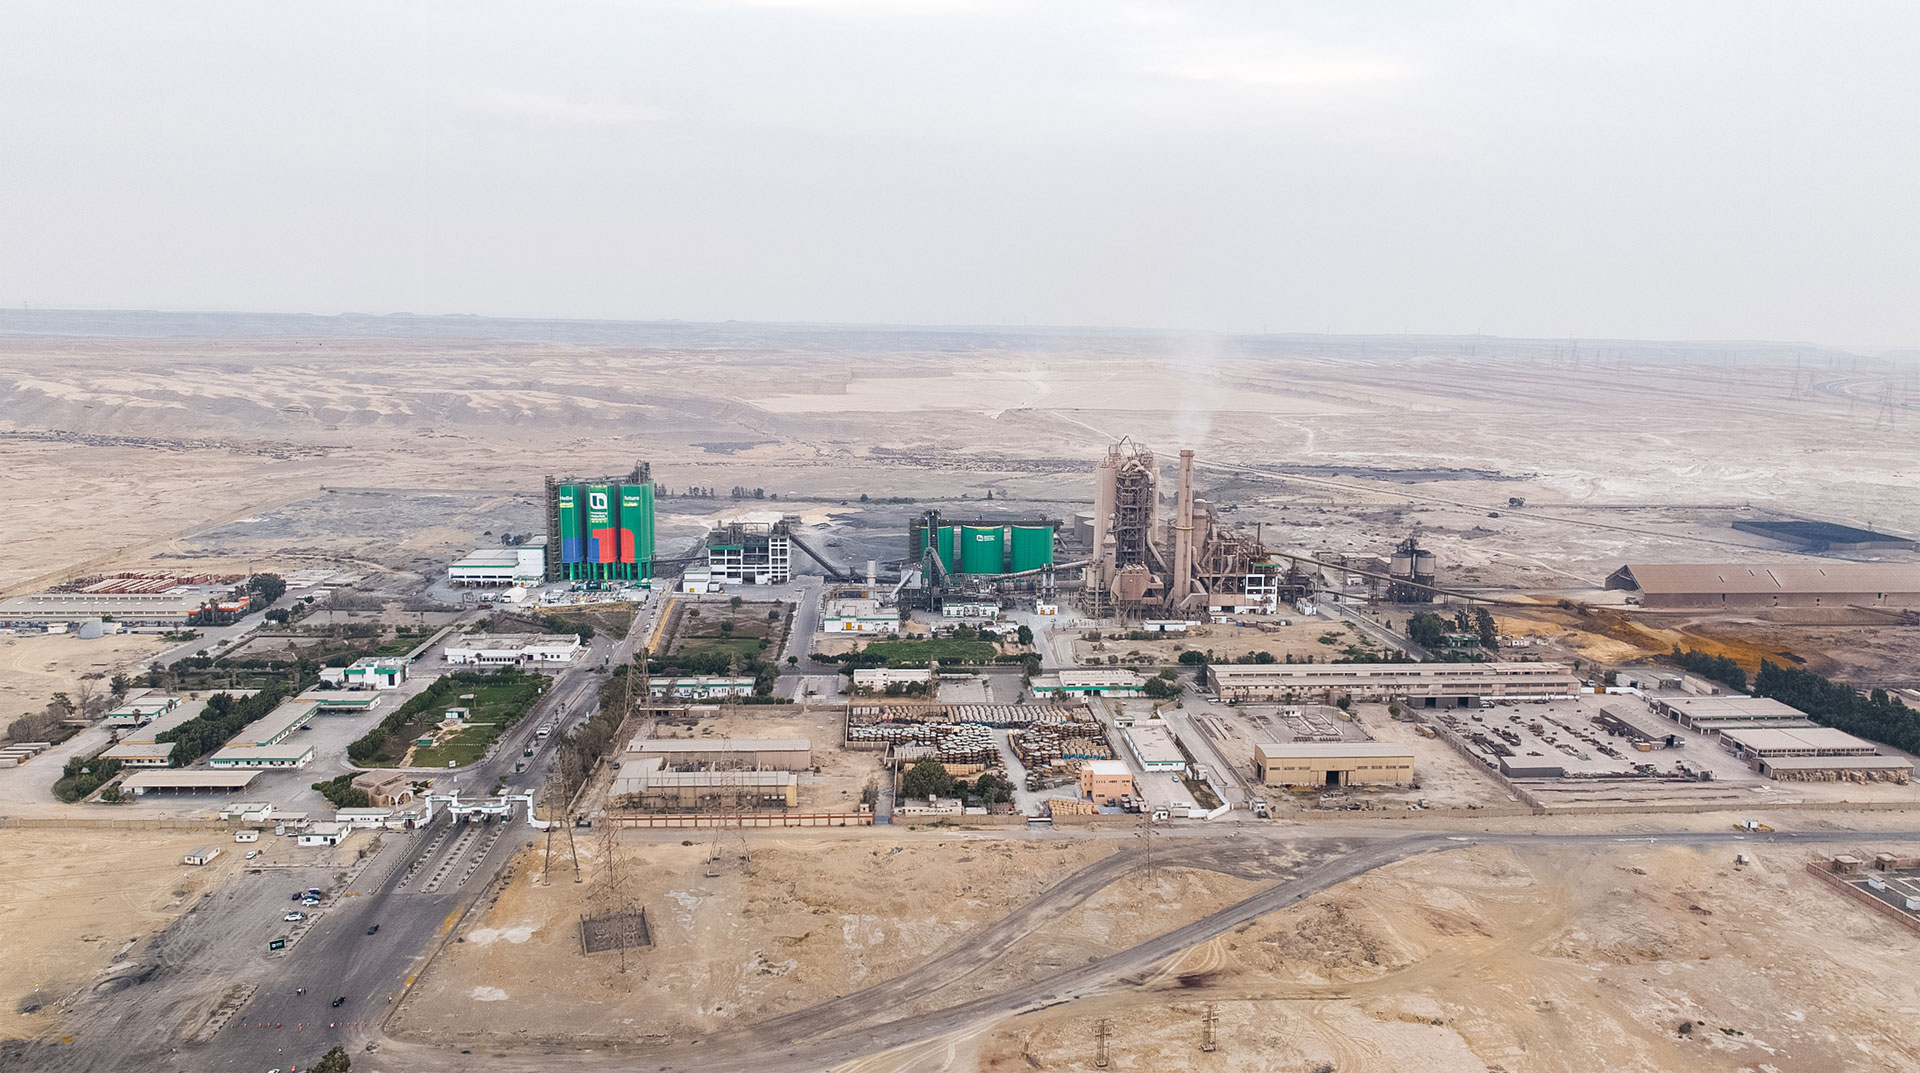 Aerial view of a cement plant in a desert